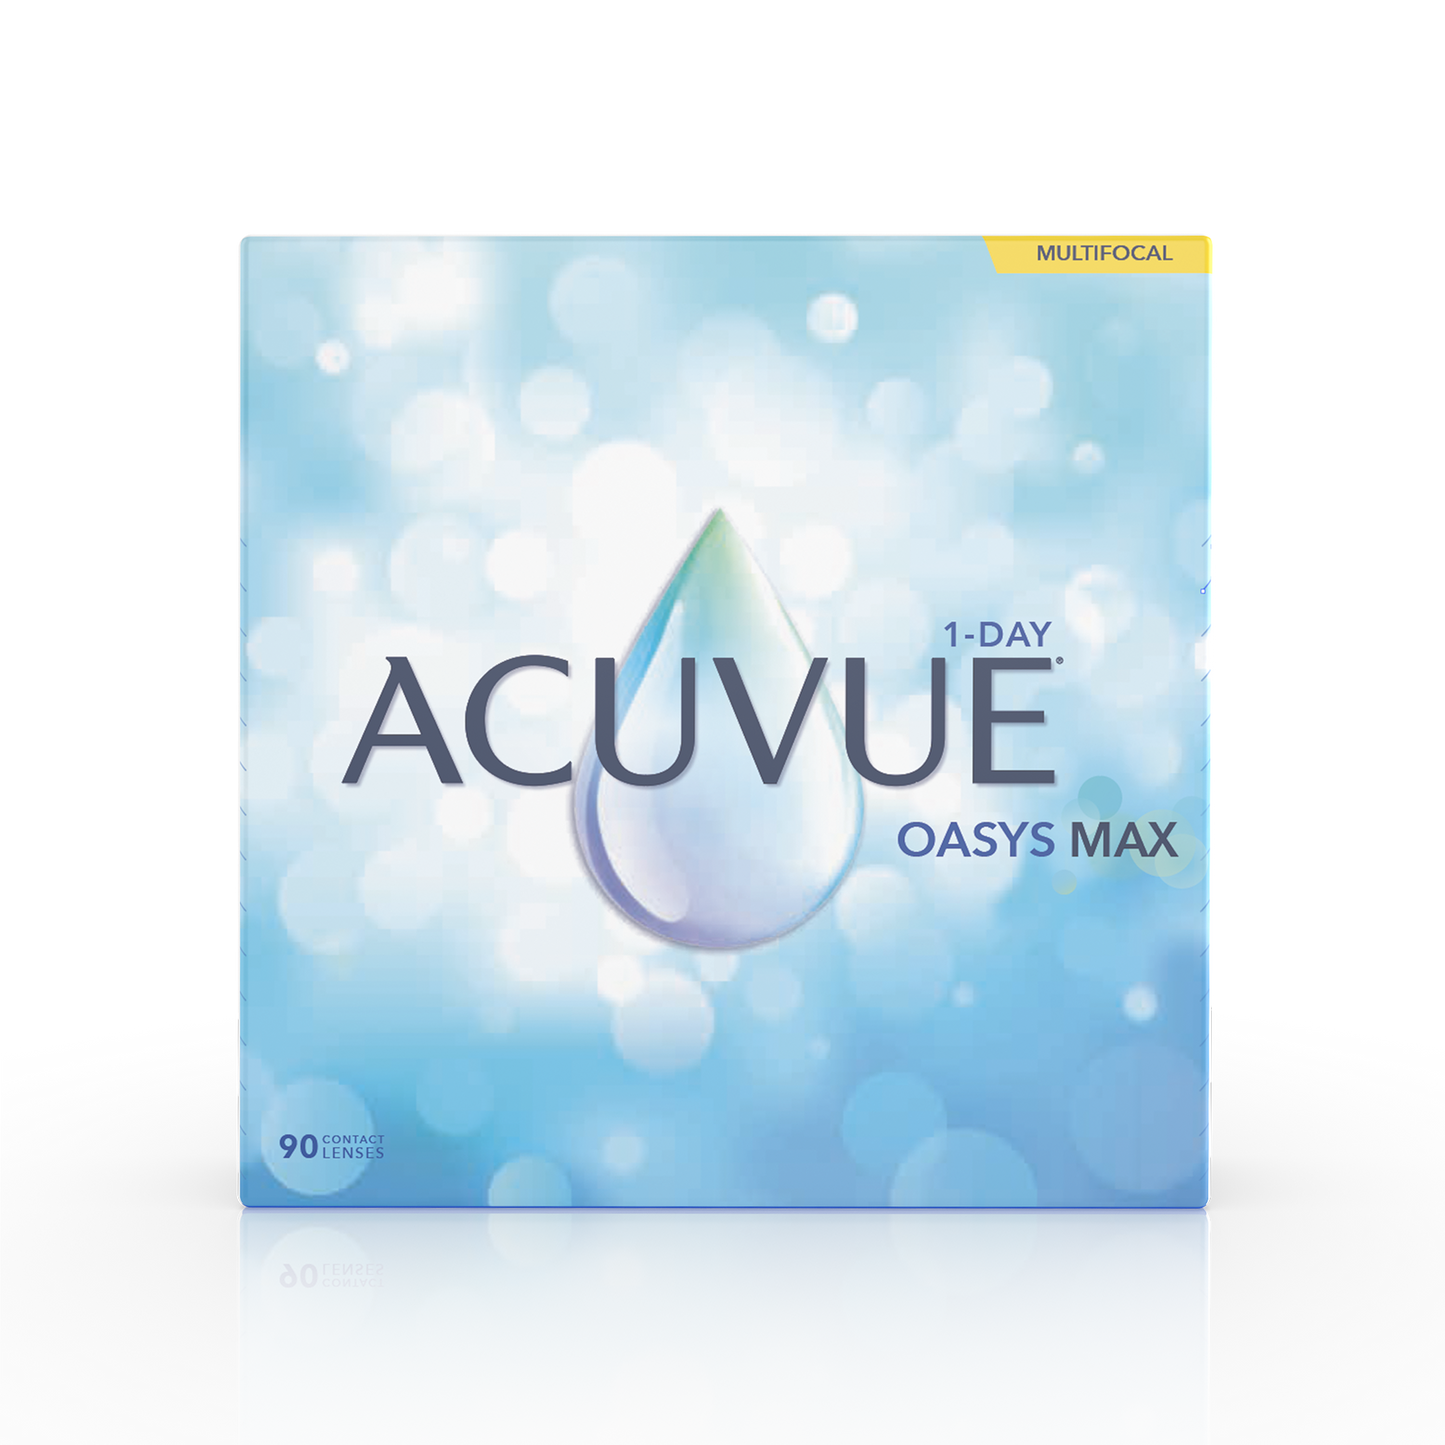 ACUVUE® Oasys MAX 1-Day Multifocal